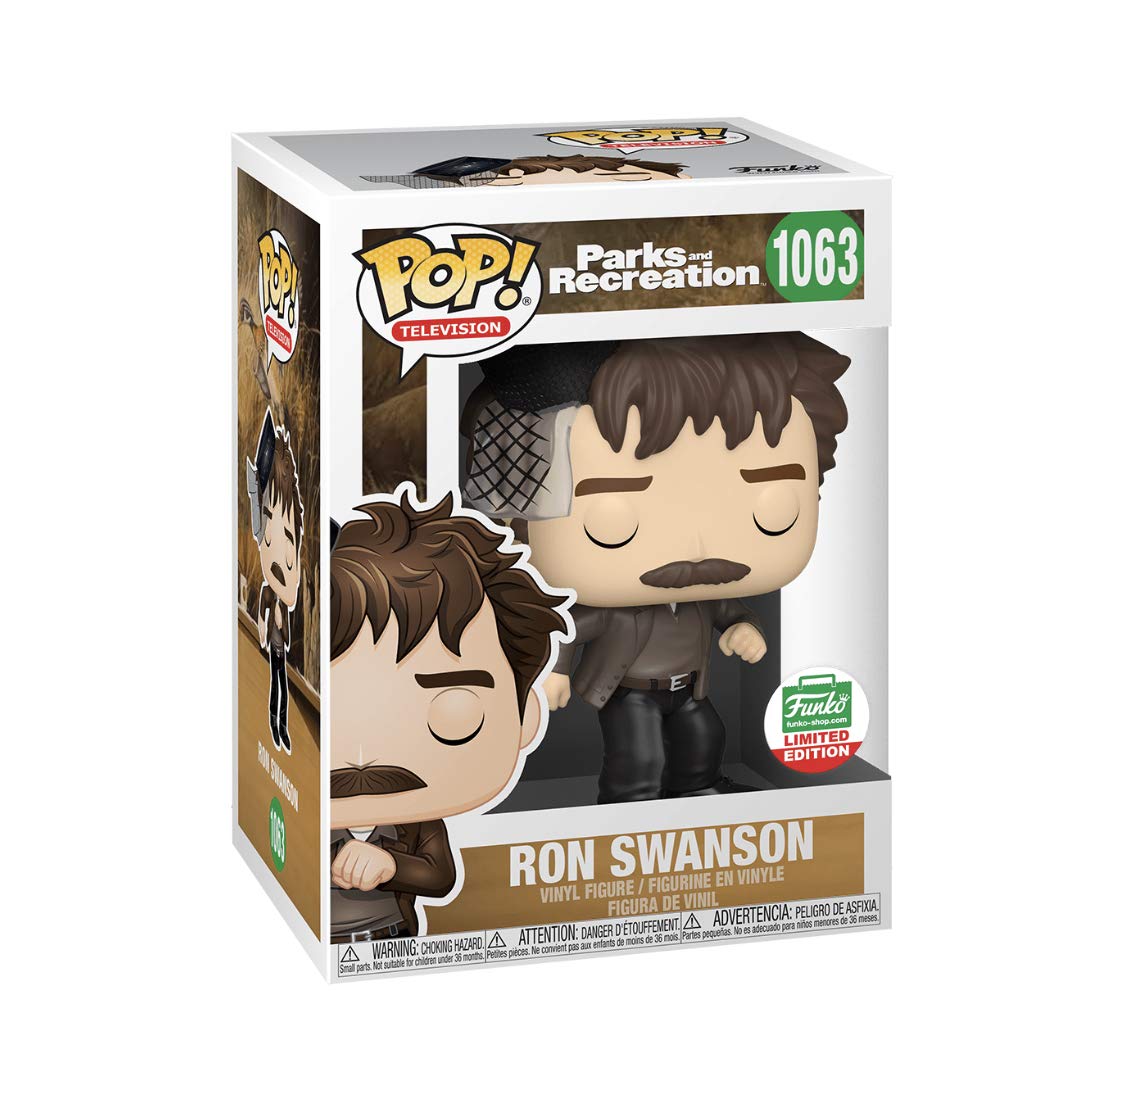 Funko POP! Television Parks and Recreation Ron Swanson #1063 [Snake Juice] Exclusive